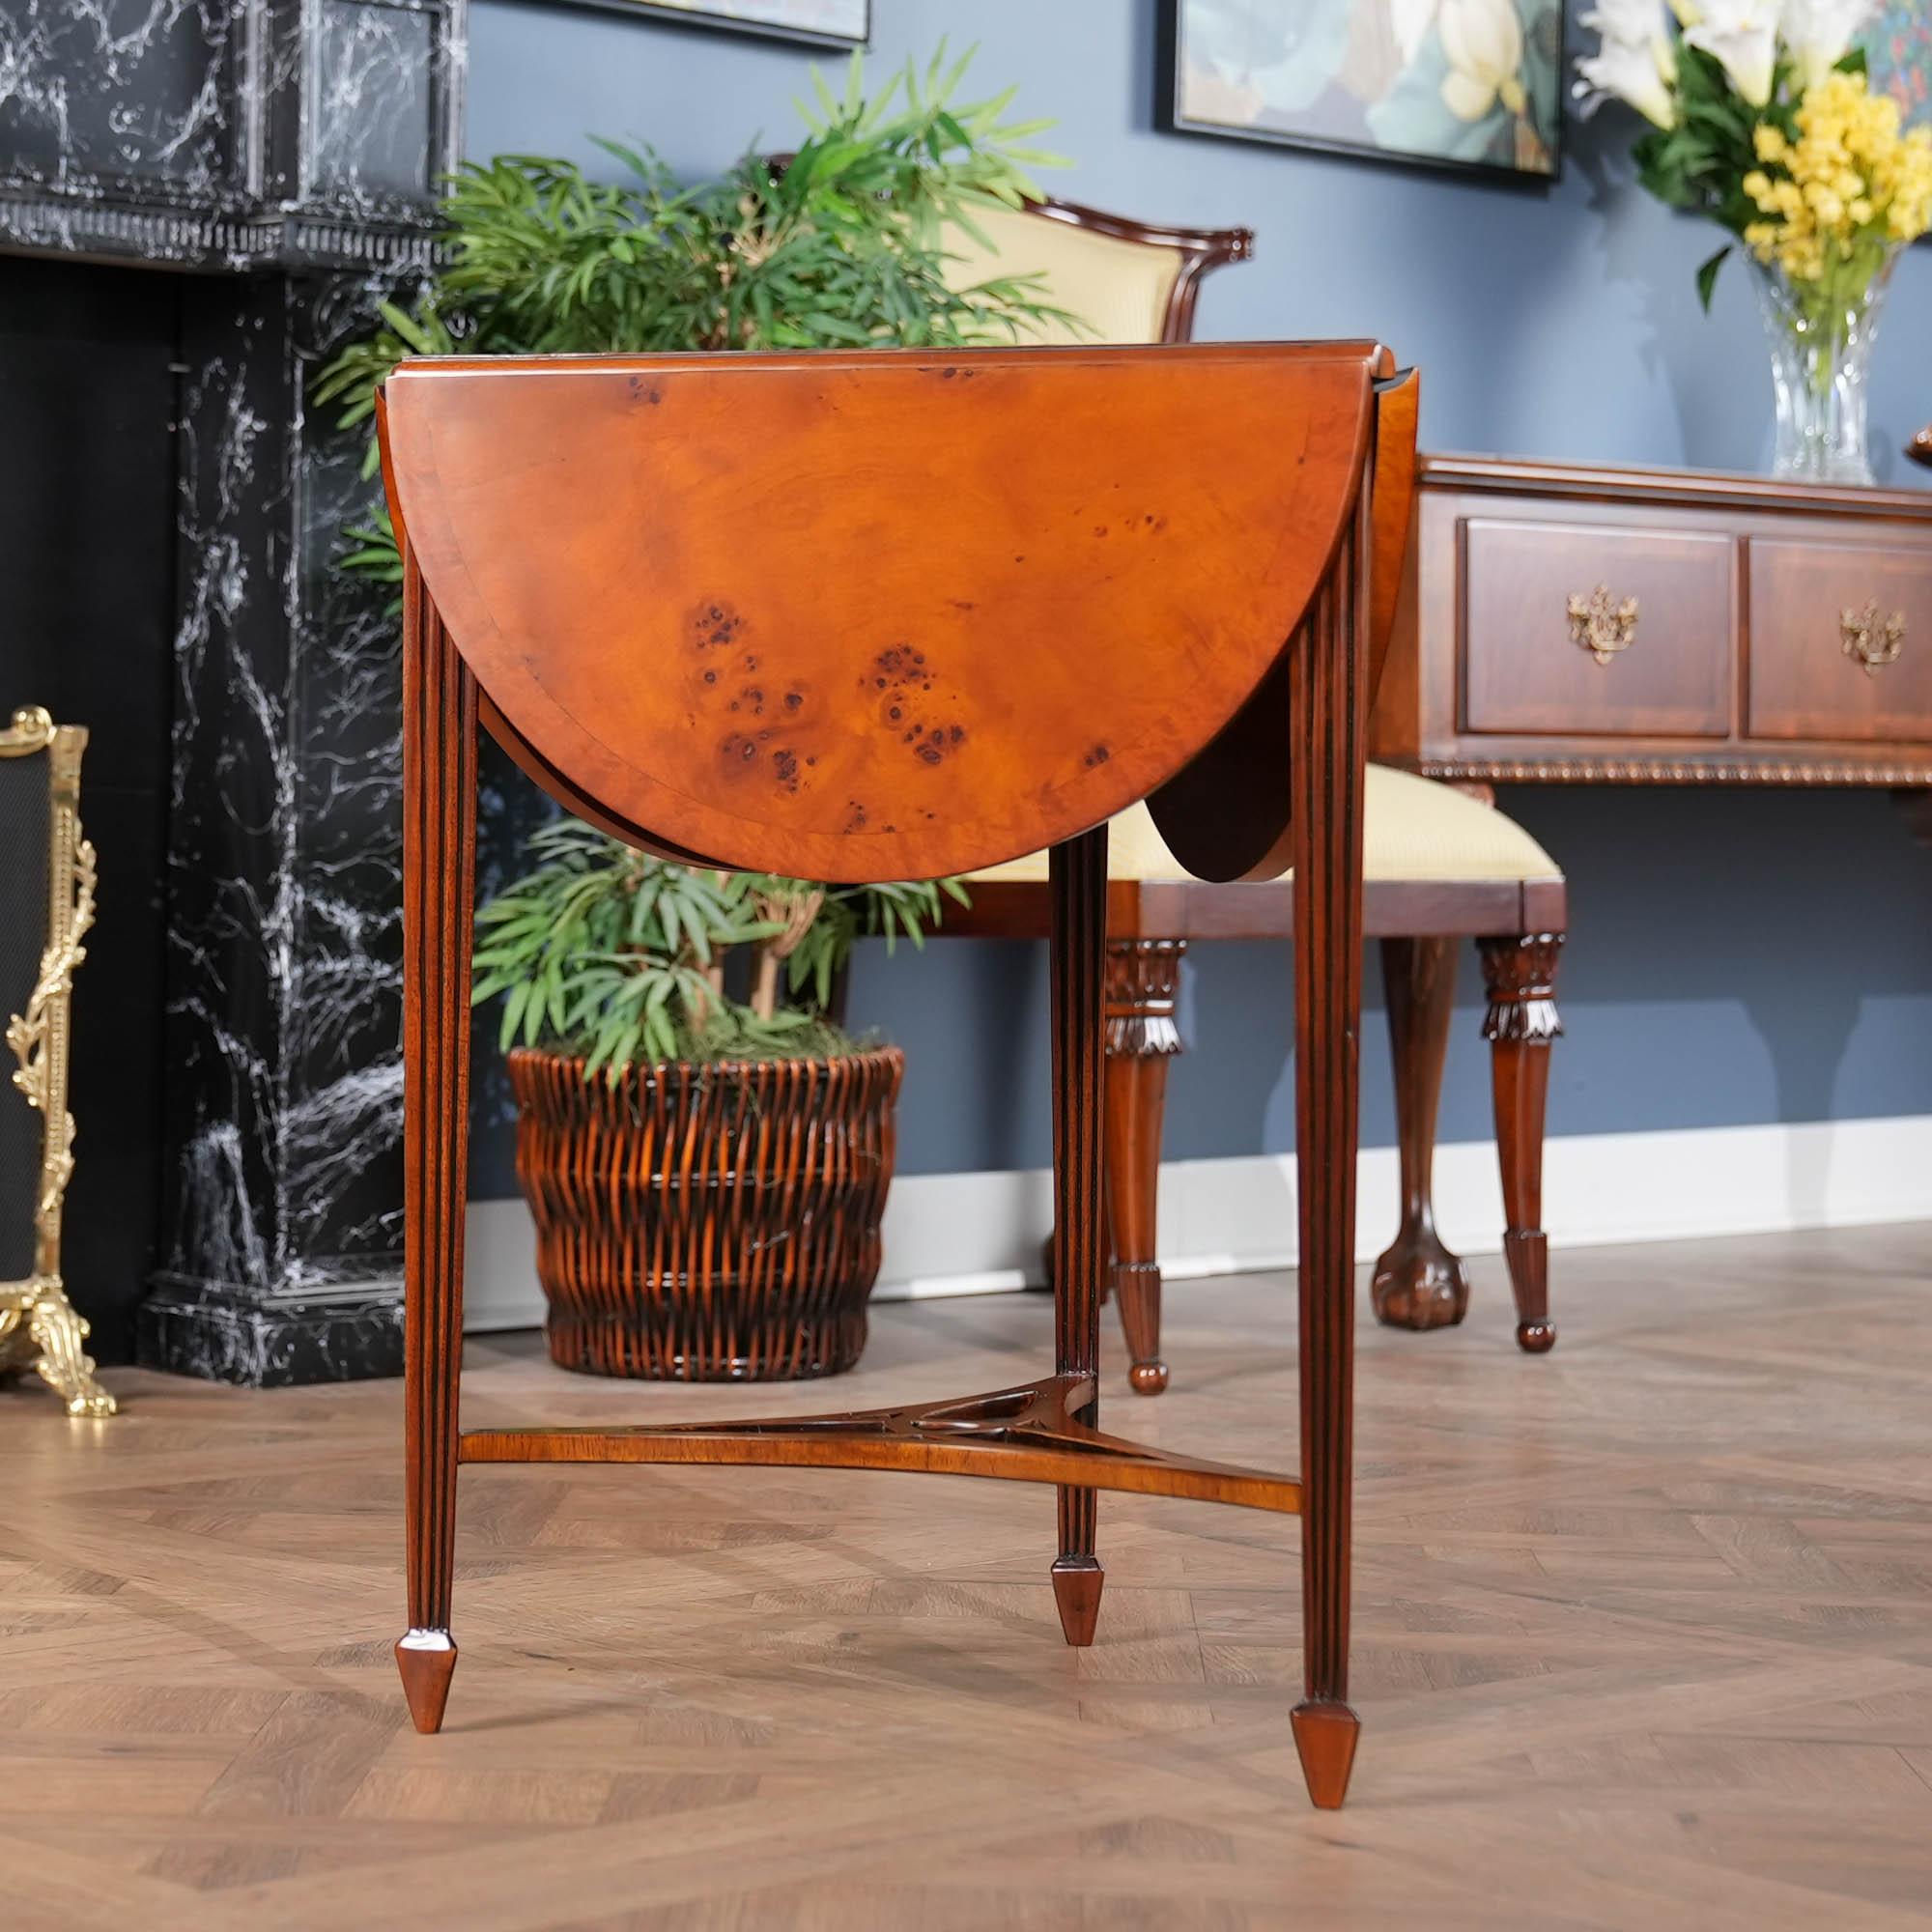 This  three leg or tripod Burled Handkerchief Table closes to small triangular size when the leaves are not in use and opens to a beautiful clover shaped table when they are opened. Beautiful burled veneers create striking patterns on the top and